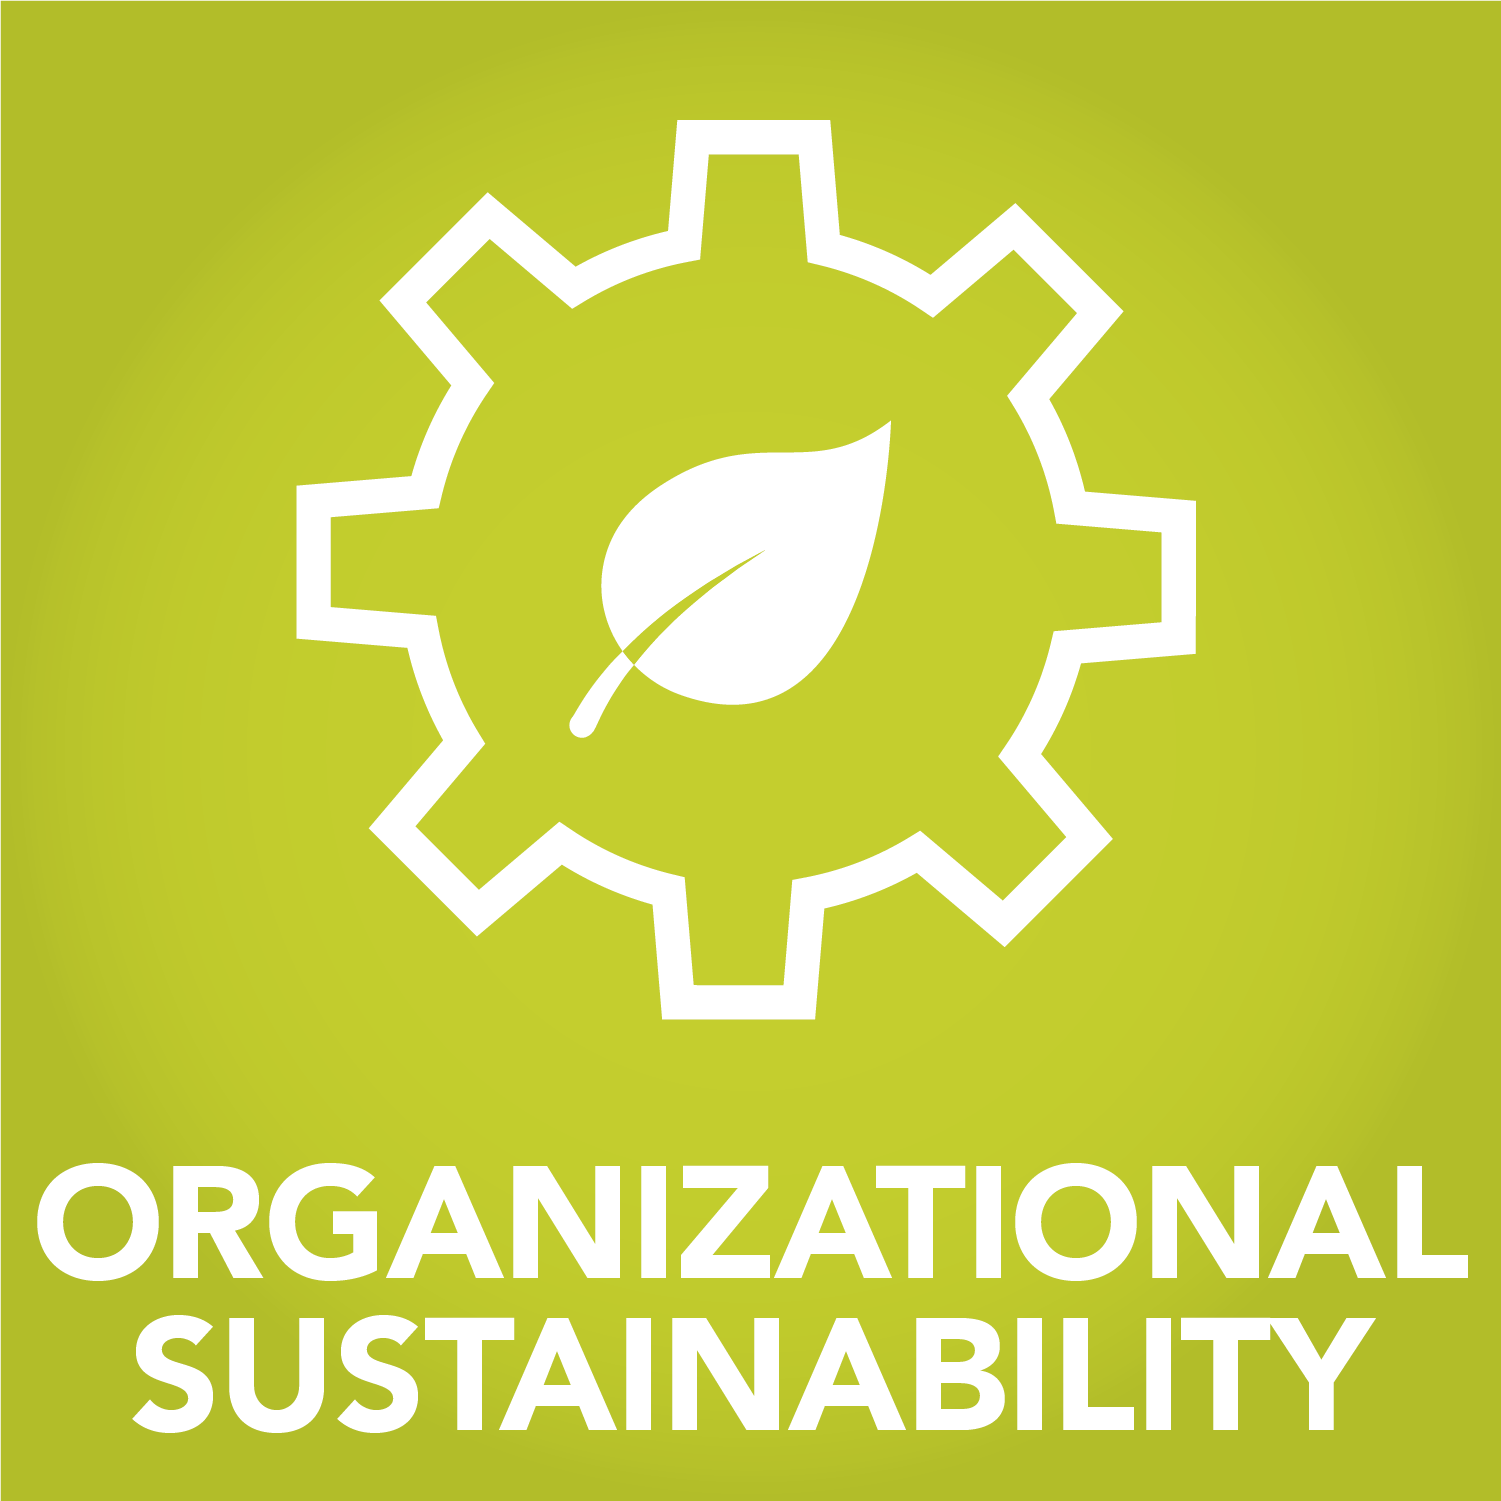 ENSURE ORGANIZATIONAL GROWTH AND SUSTAINABILITY